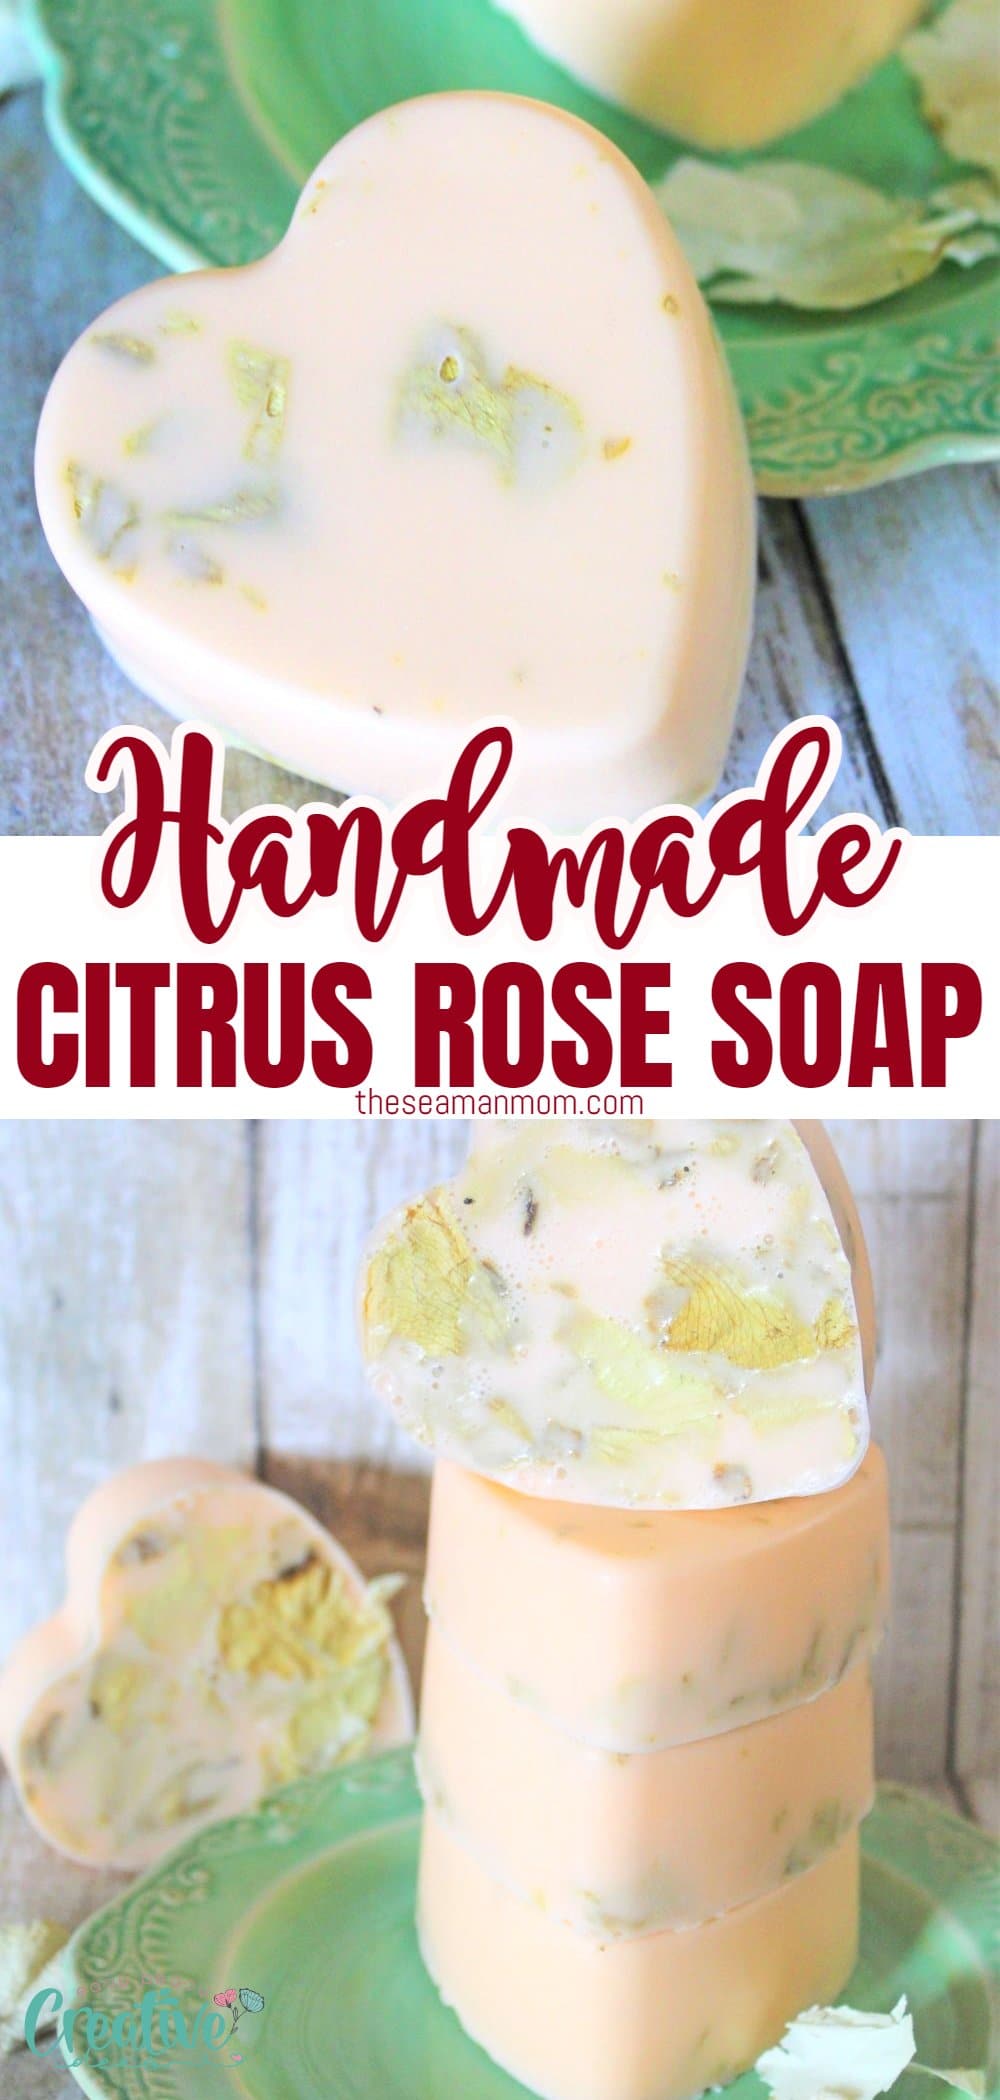 Want to learn how to make your own rose soap? Learn the steps and ingredients necessary for a successful batch. This recipe for handmade rose soap with citrus notes is easy to make at home and smells amazing! It's perfect as a gift, or just because. via @petroneagu